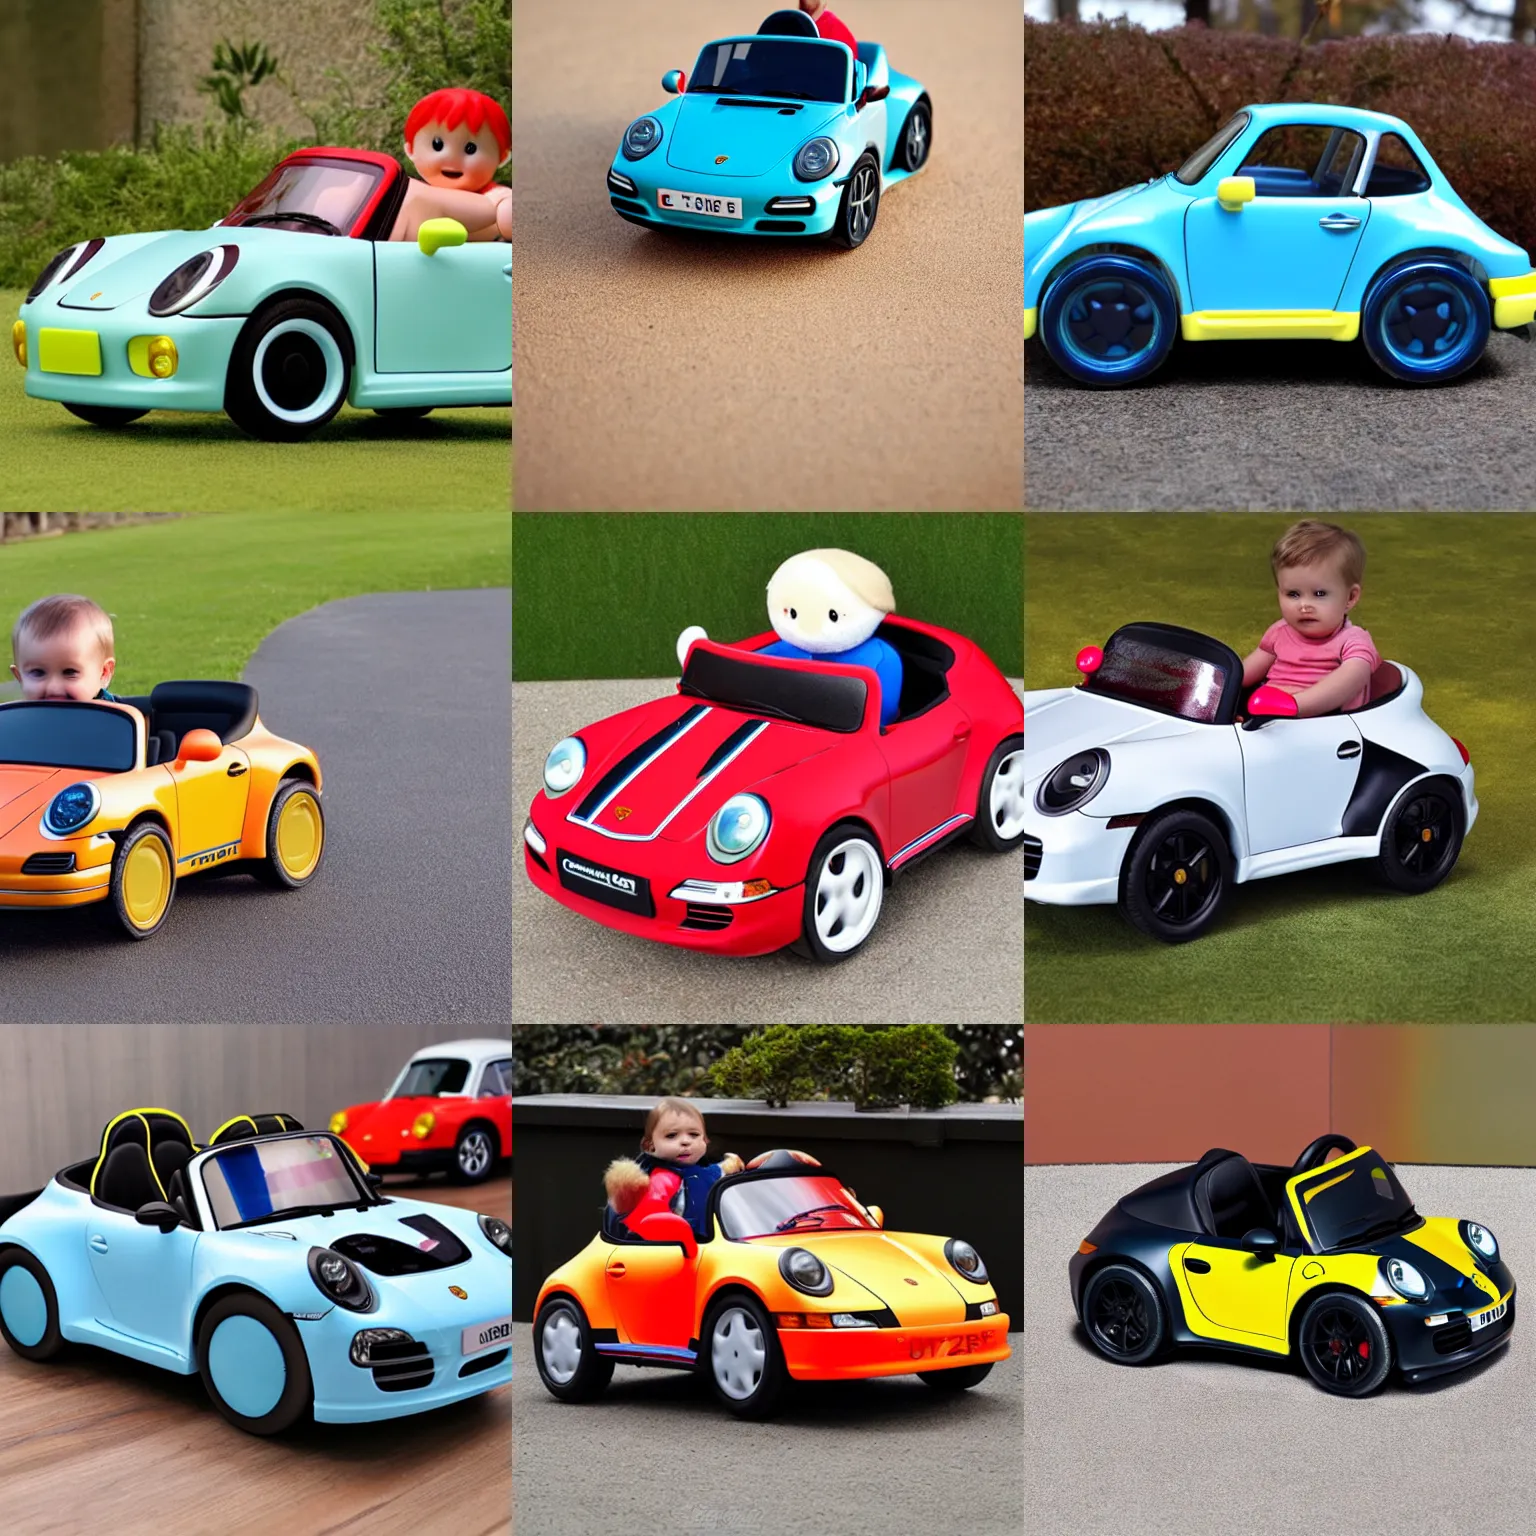 baby cars in a school class, Stable Diffusion